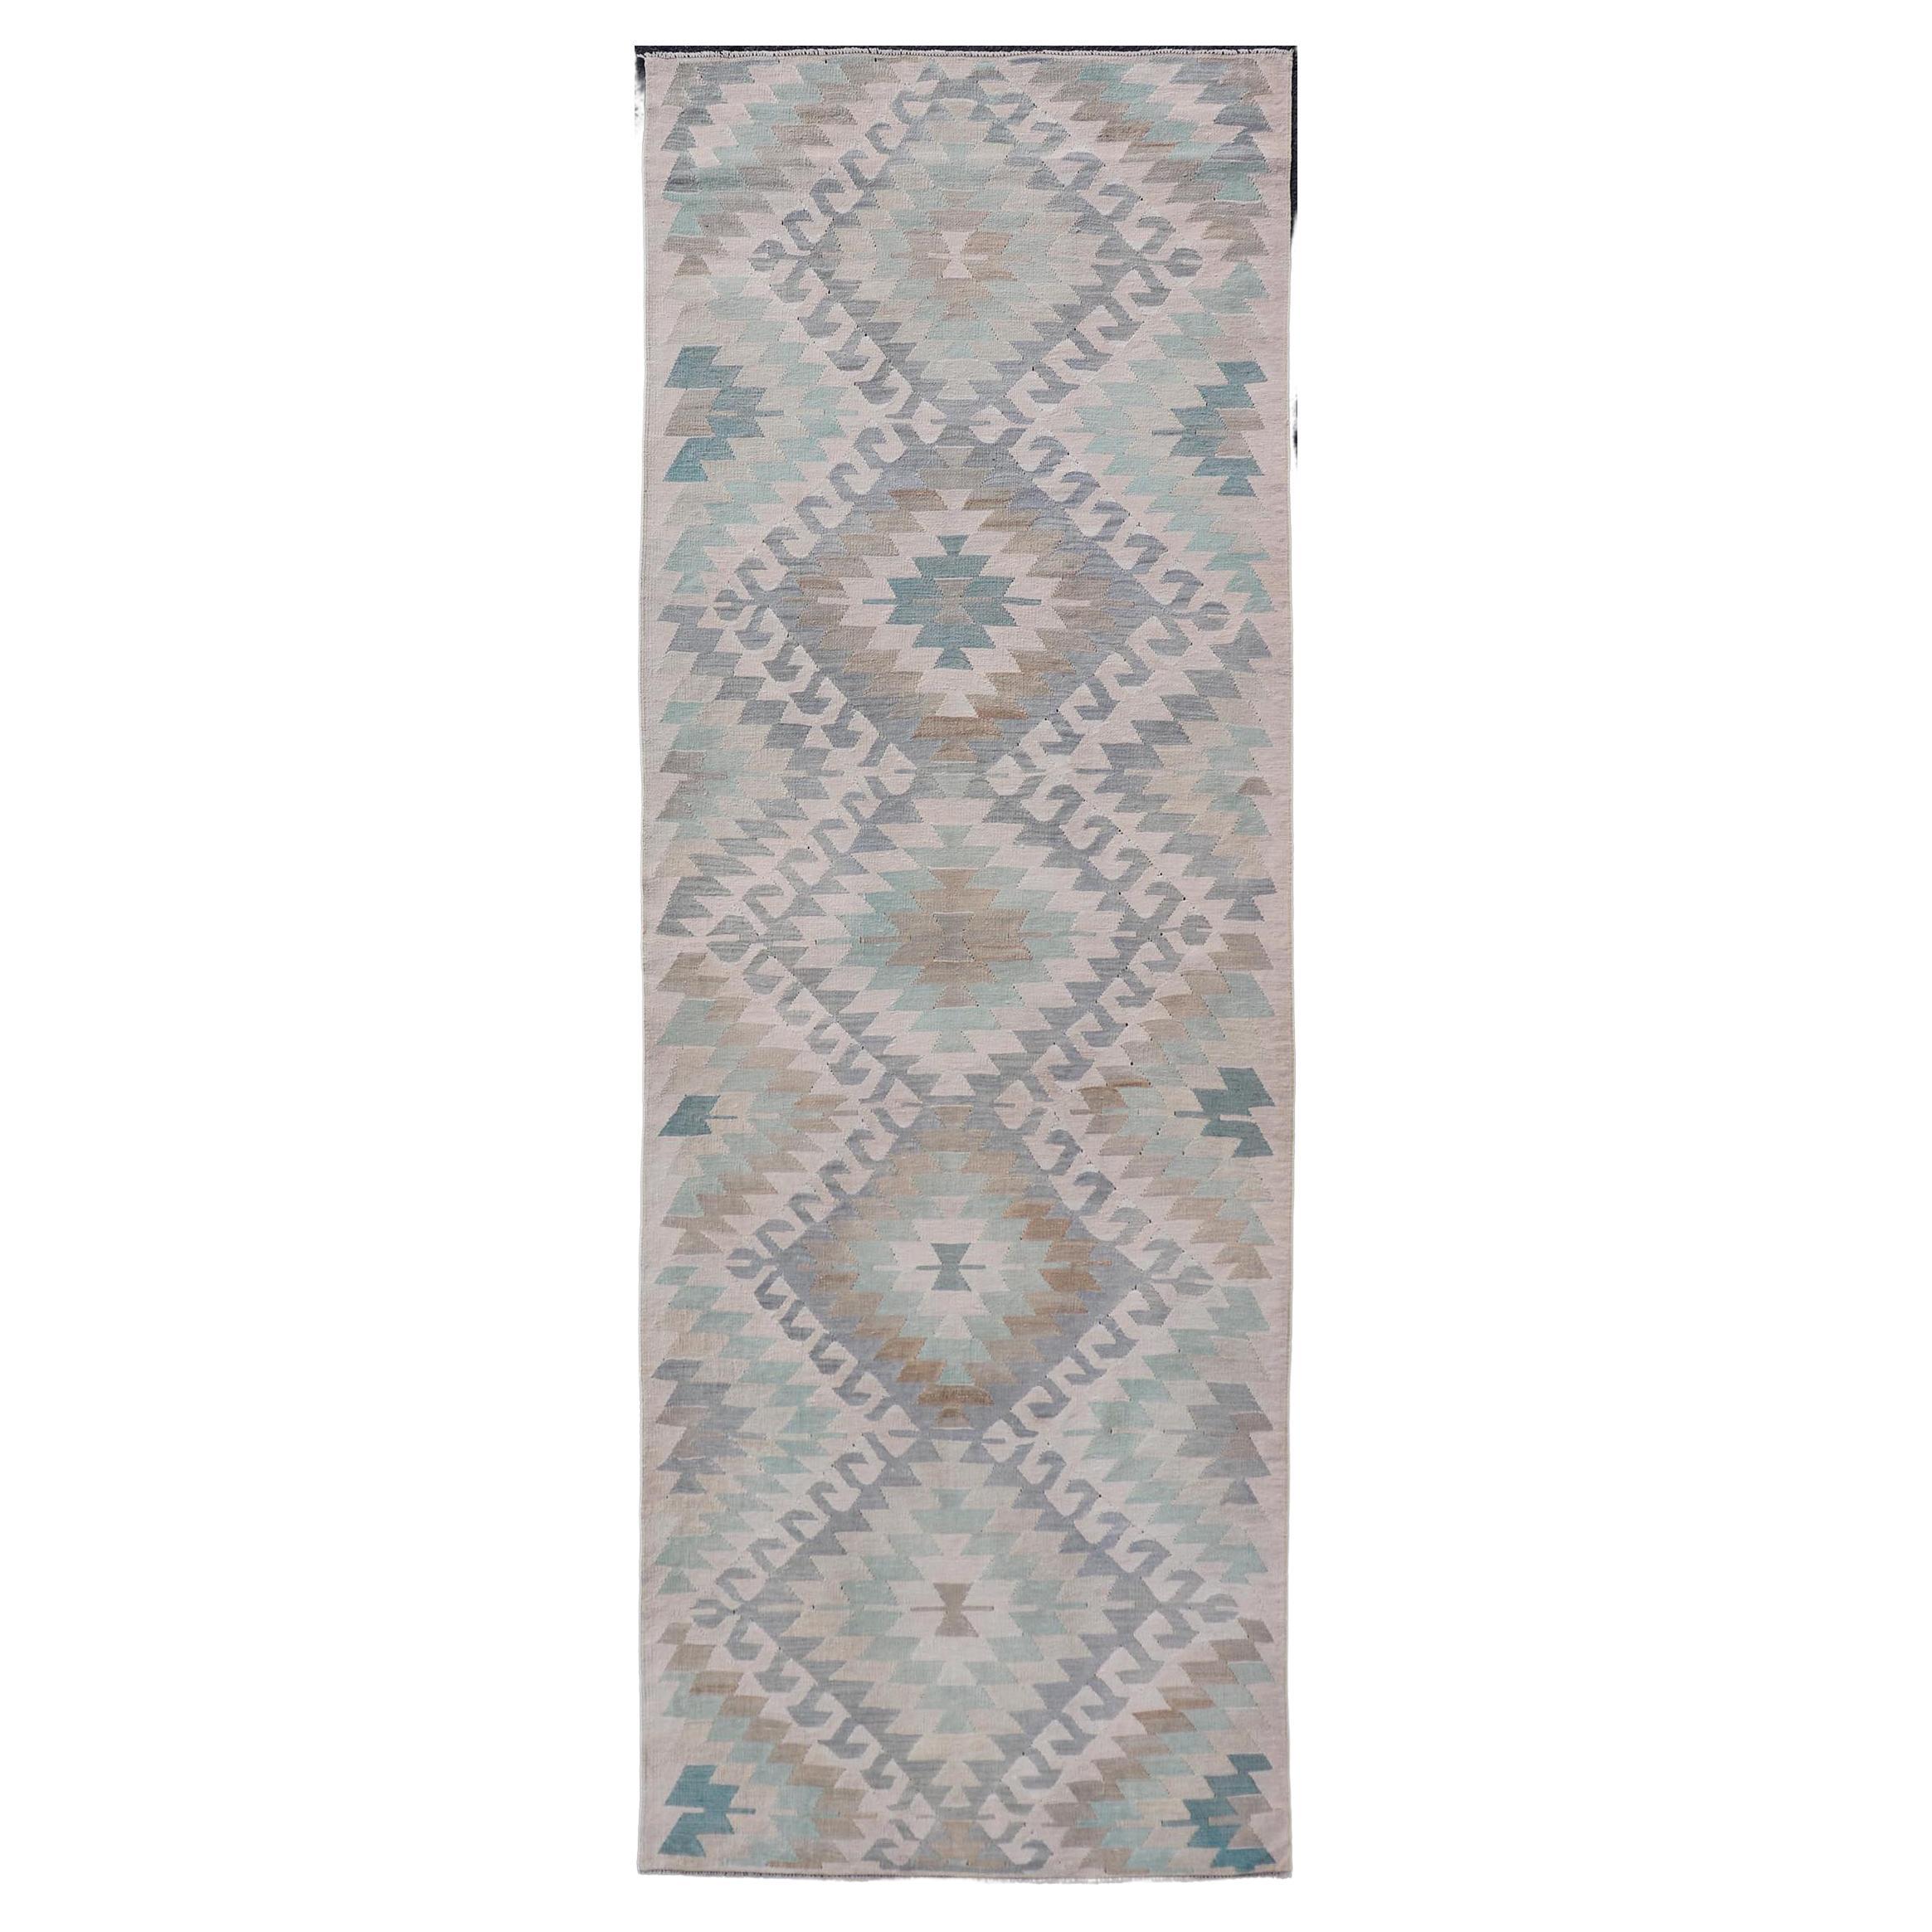 Geometric Design Vintage Turkish Tribal Flat-Weave Rug in Teal and Neutrals